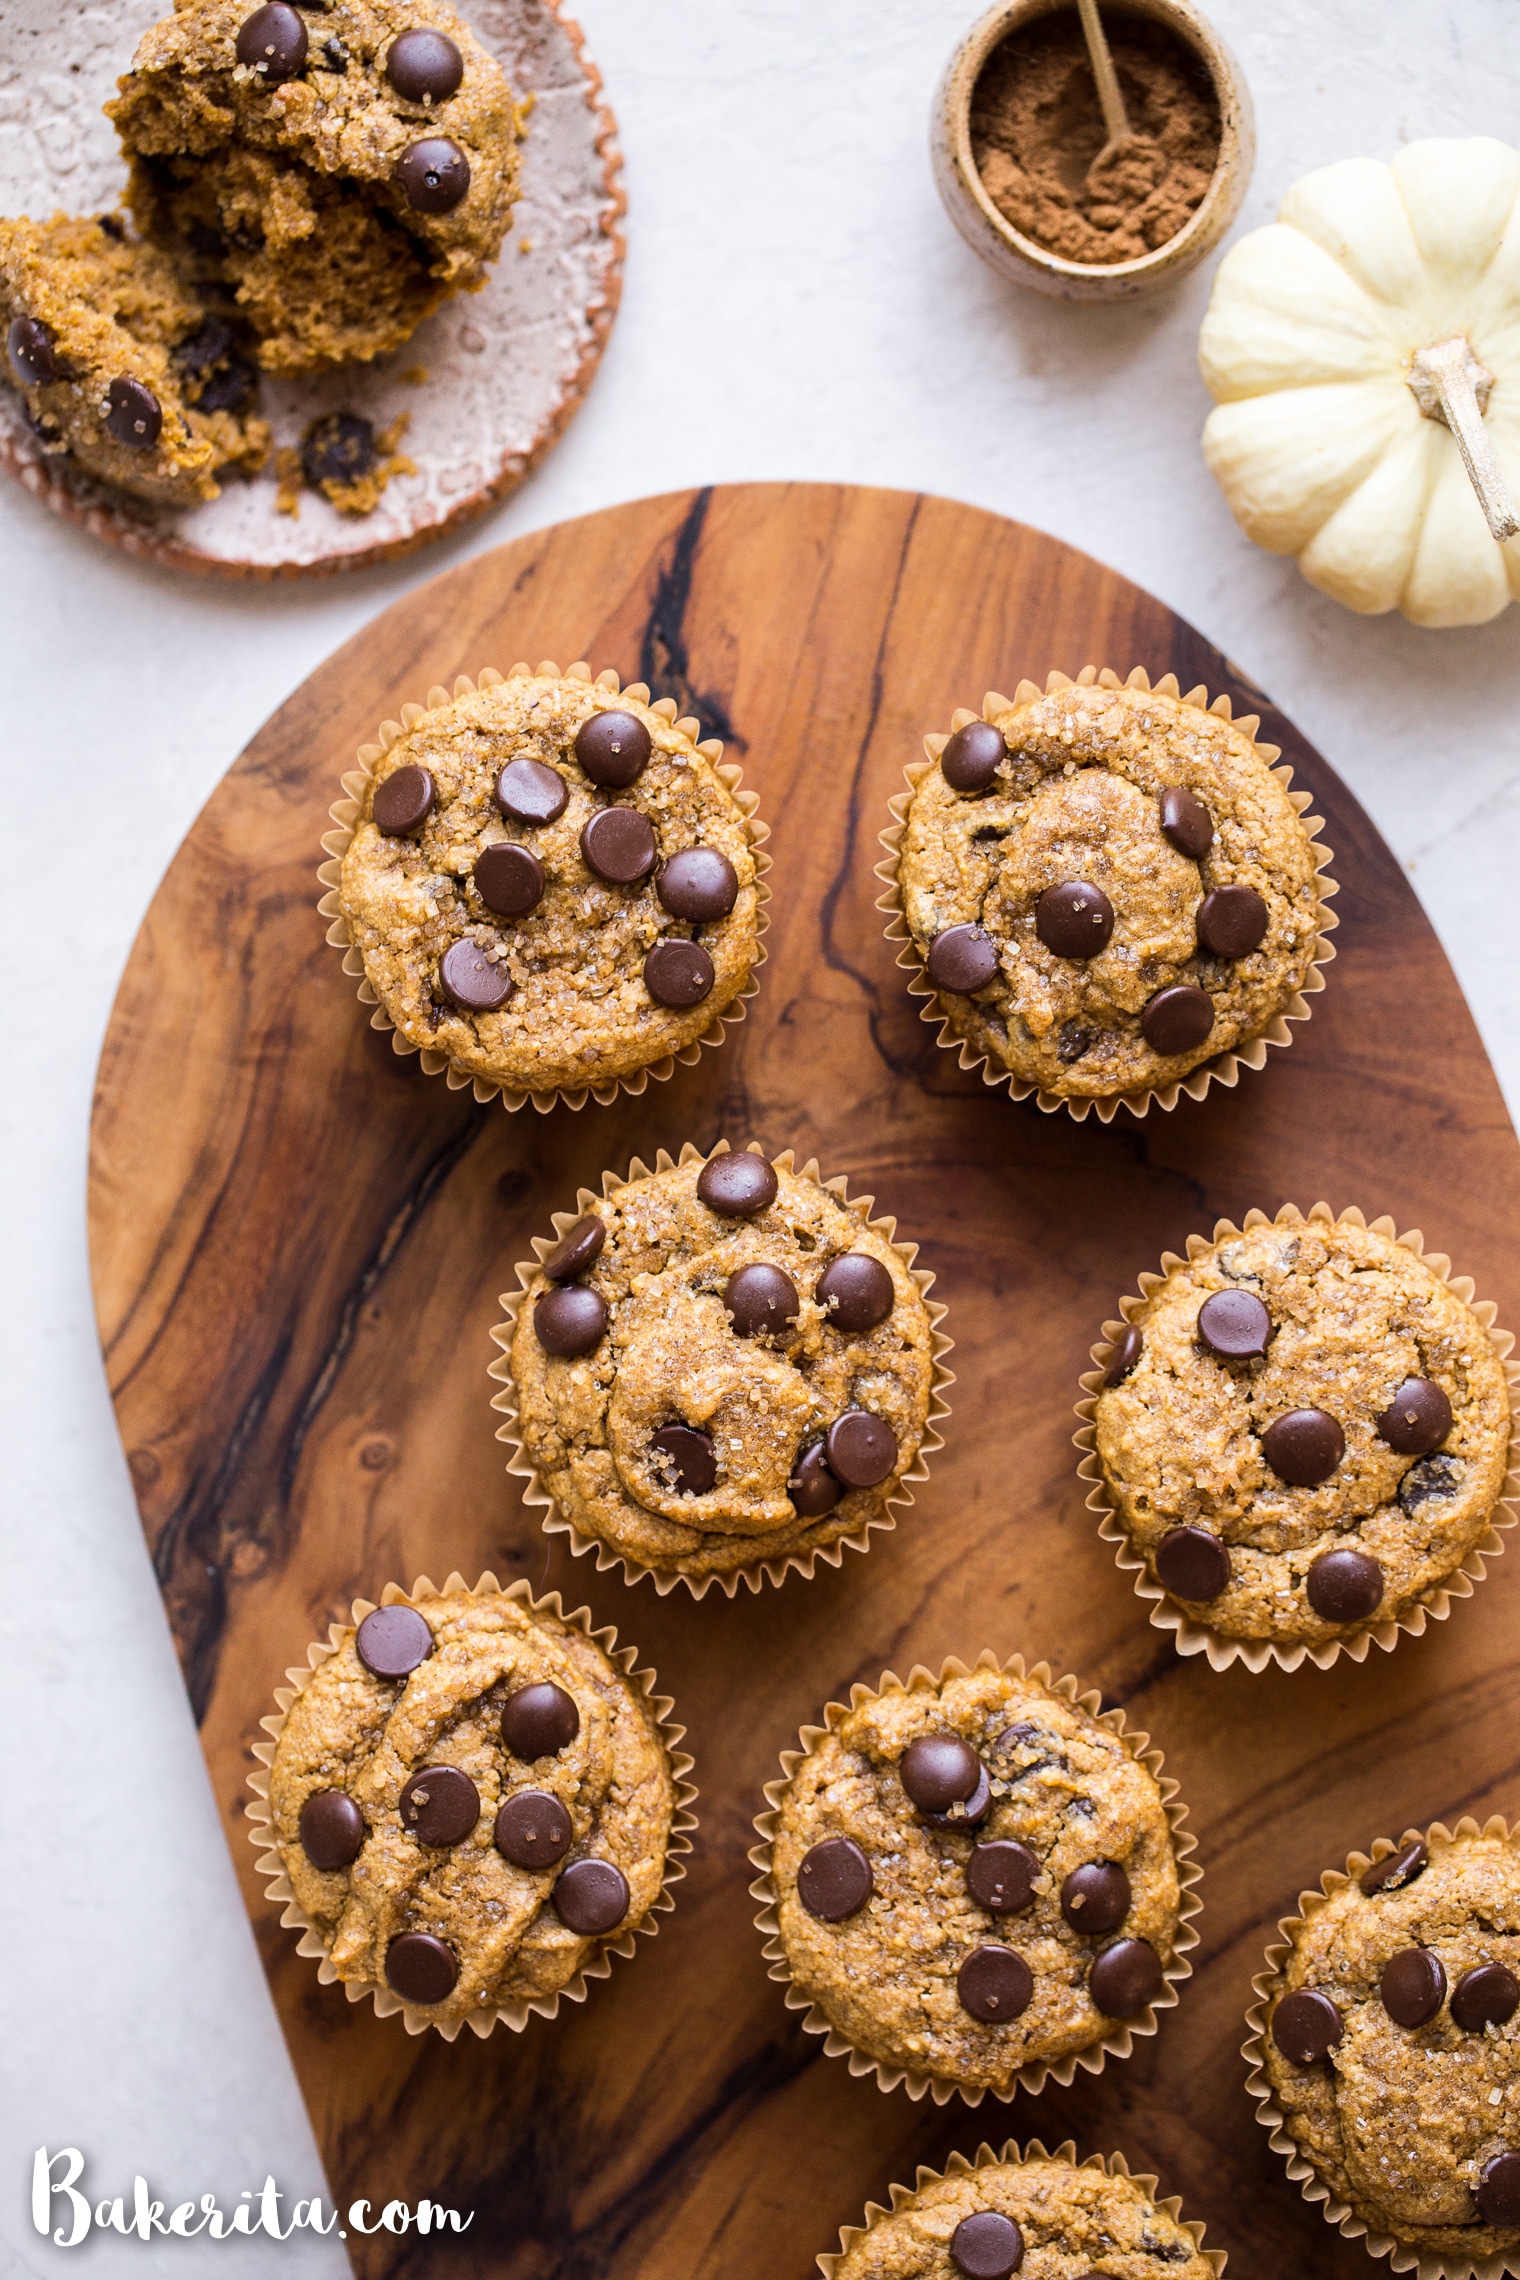 These Gluten-Free Vegan Chocolate Chip Pumpkin Muffins are fluffy, chocolatey, and full of warm pumpkin spices! These are perfect for meal prepping since they freeze well and make a wonderful breakfast, snack, or dessert.